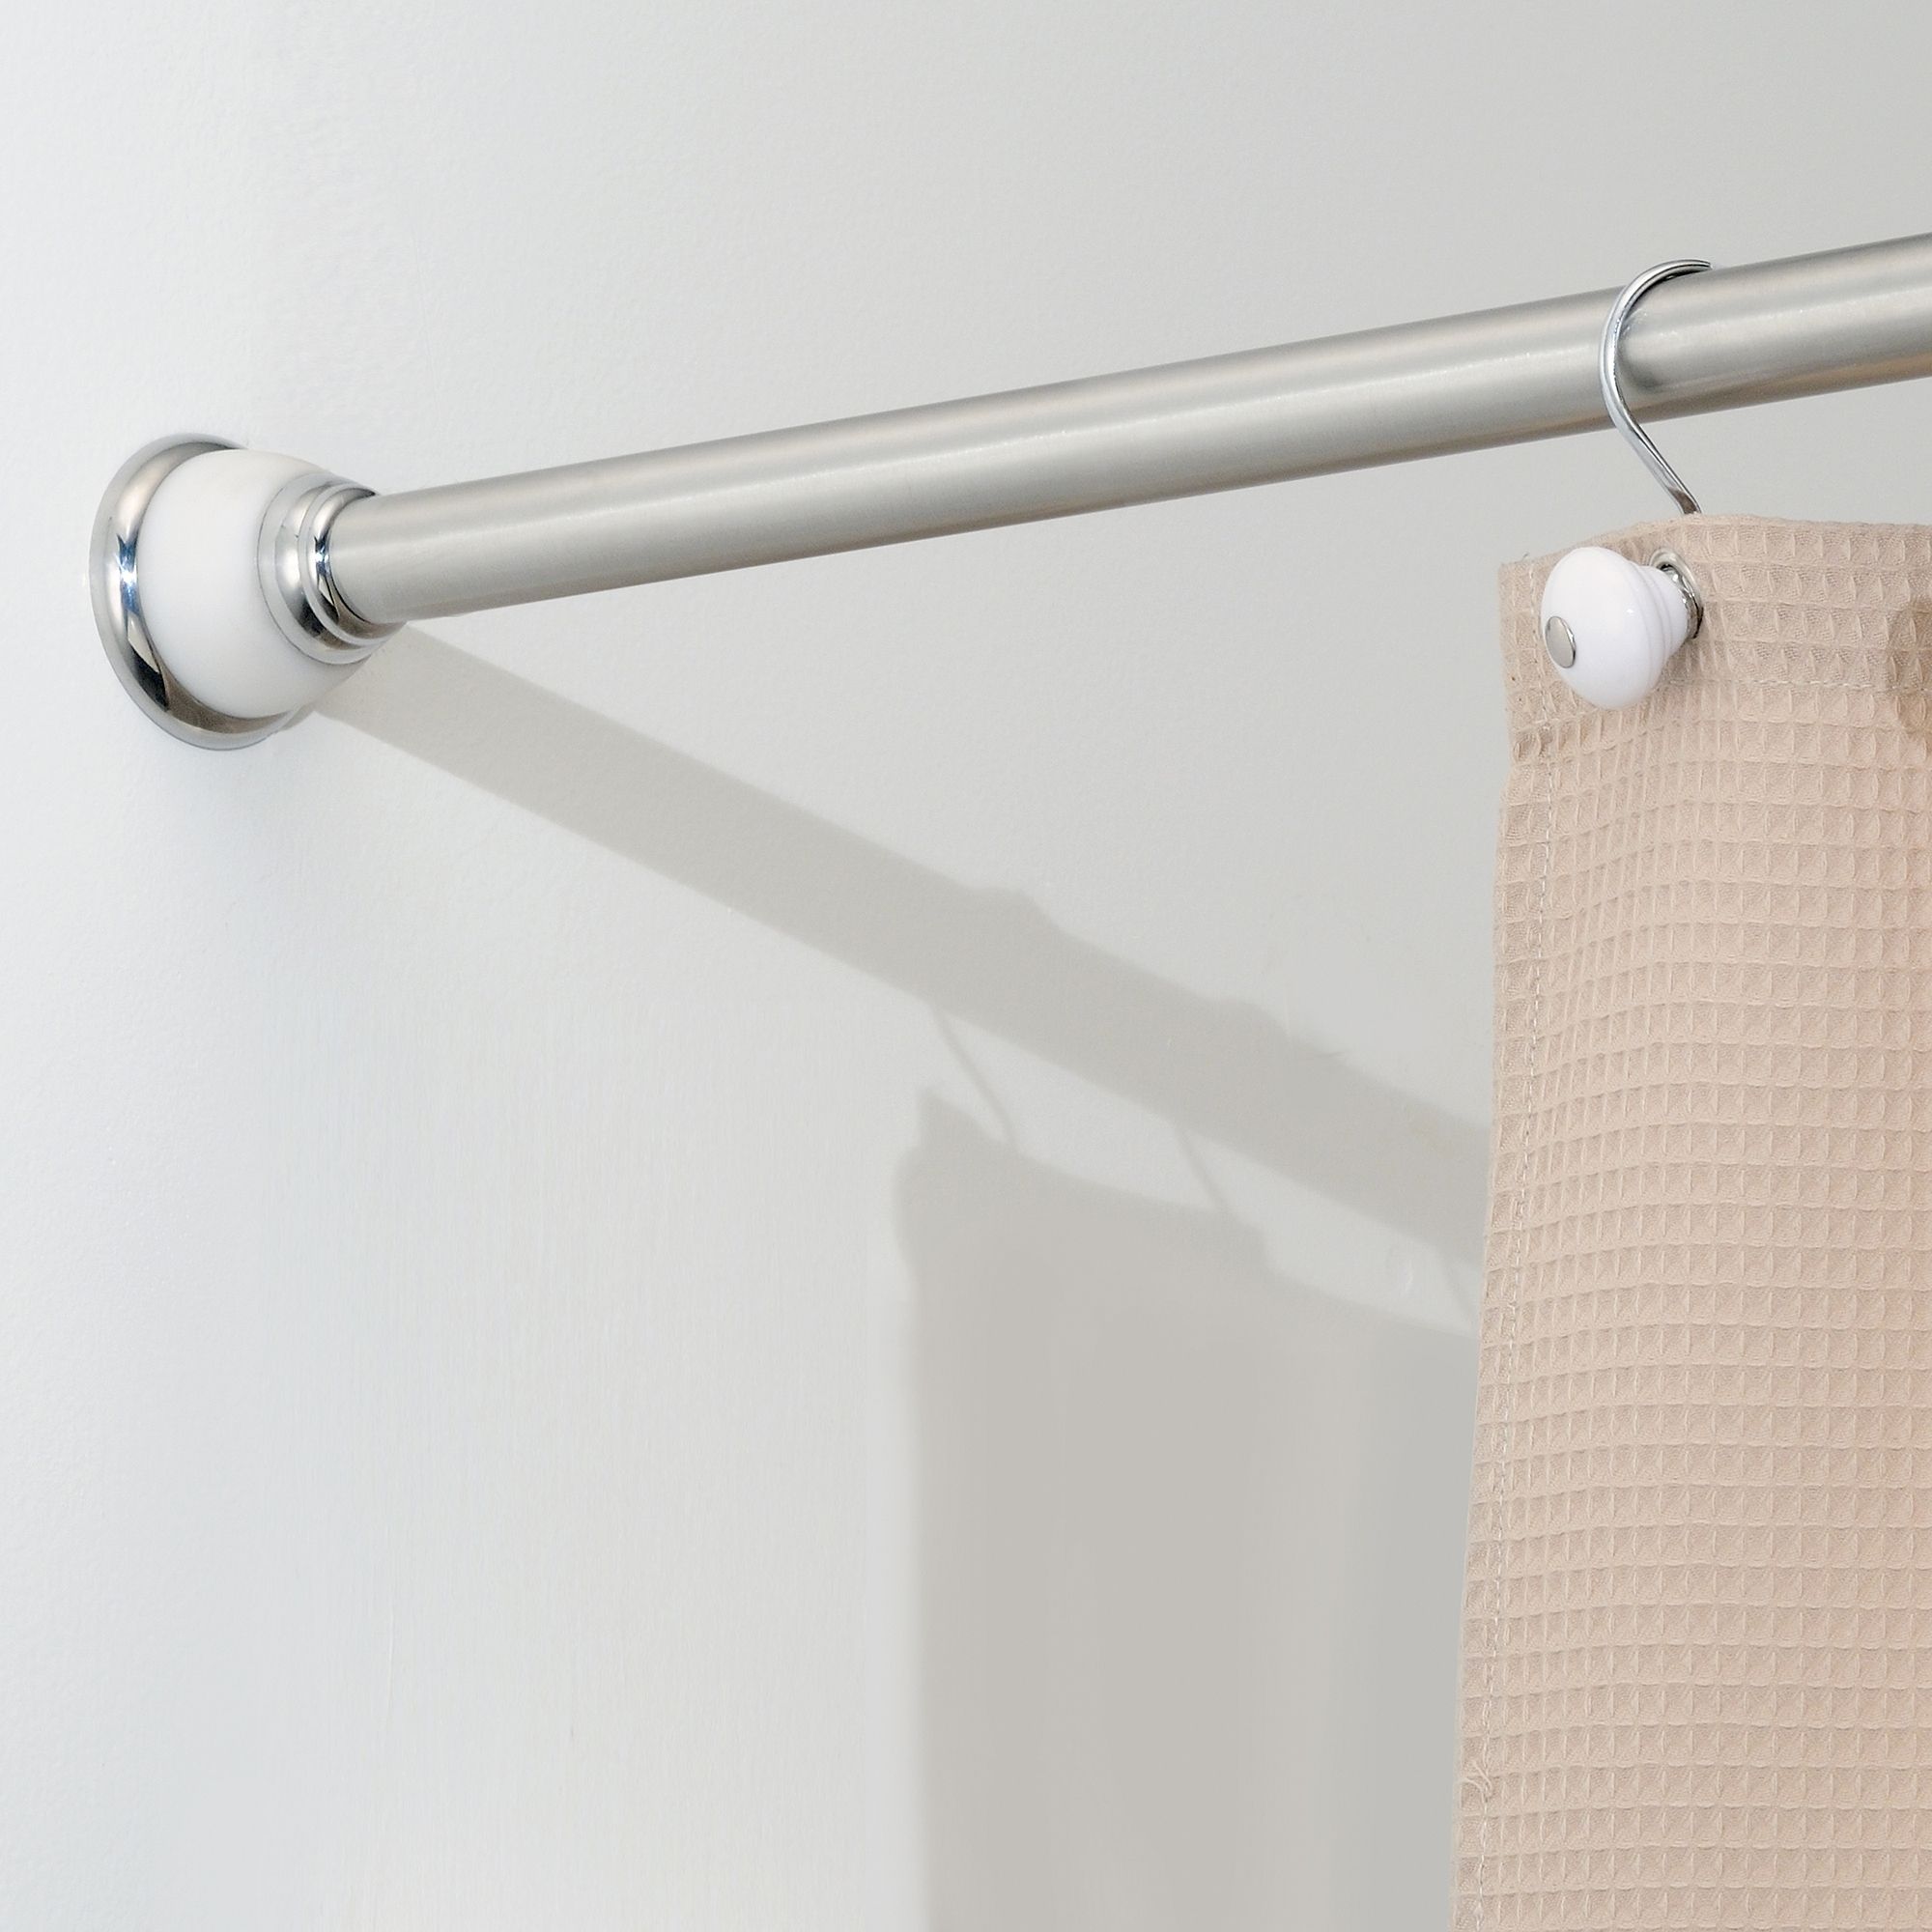 Shower Curtain Rod Regarding Spring Loaded Curtain Poles (View 15 of 25)